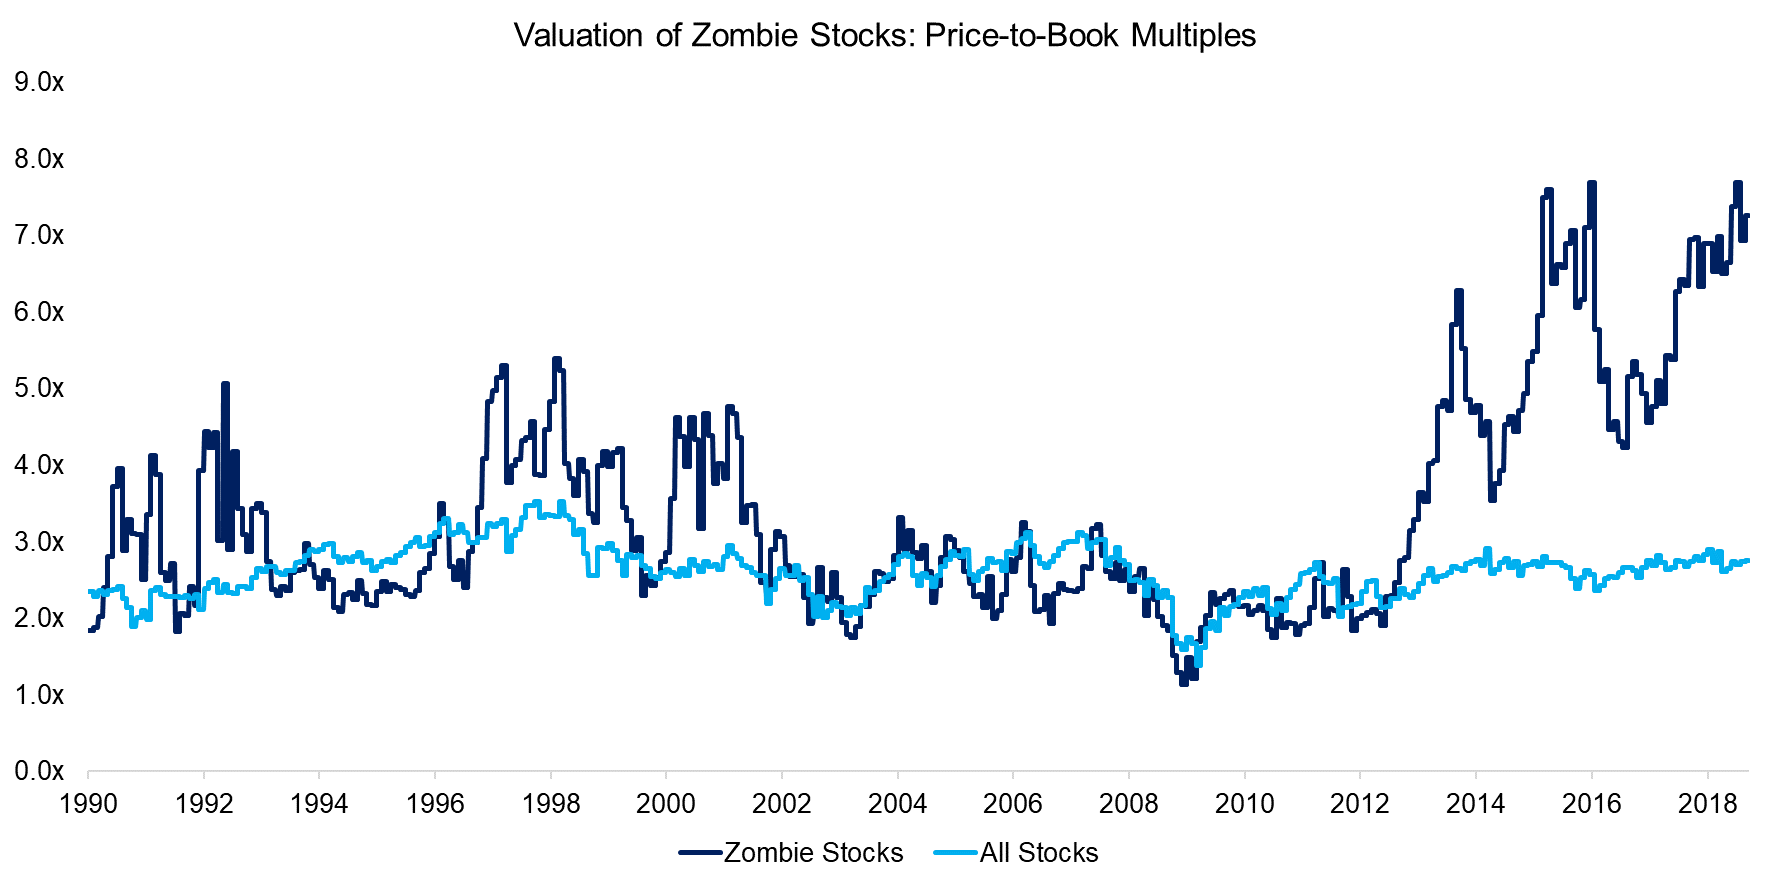 Valuation of Zombie Stocks Price-to-Book Multiples